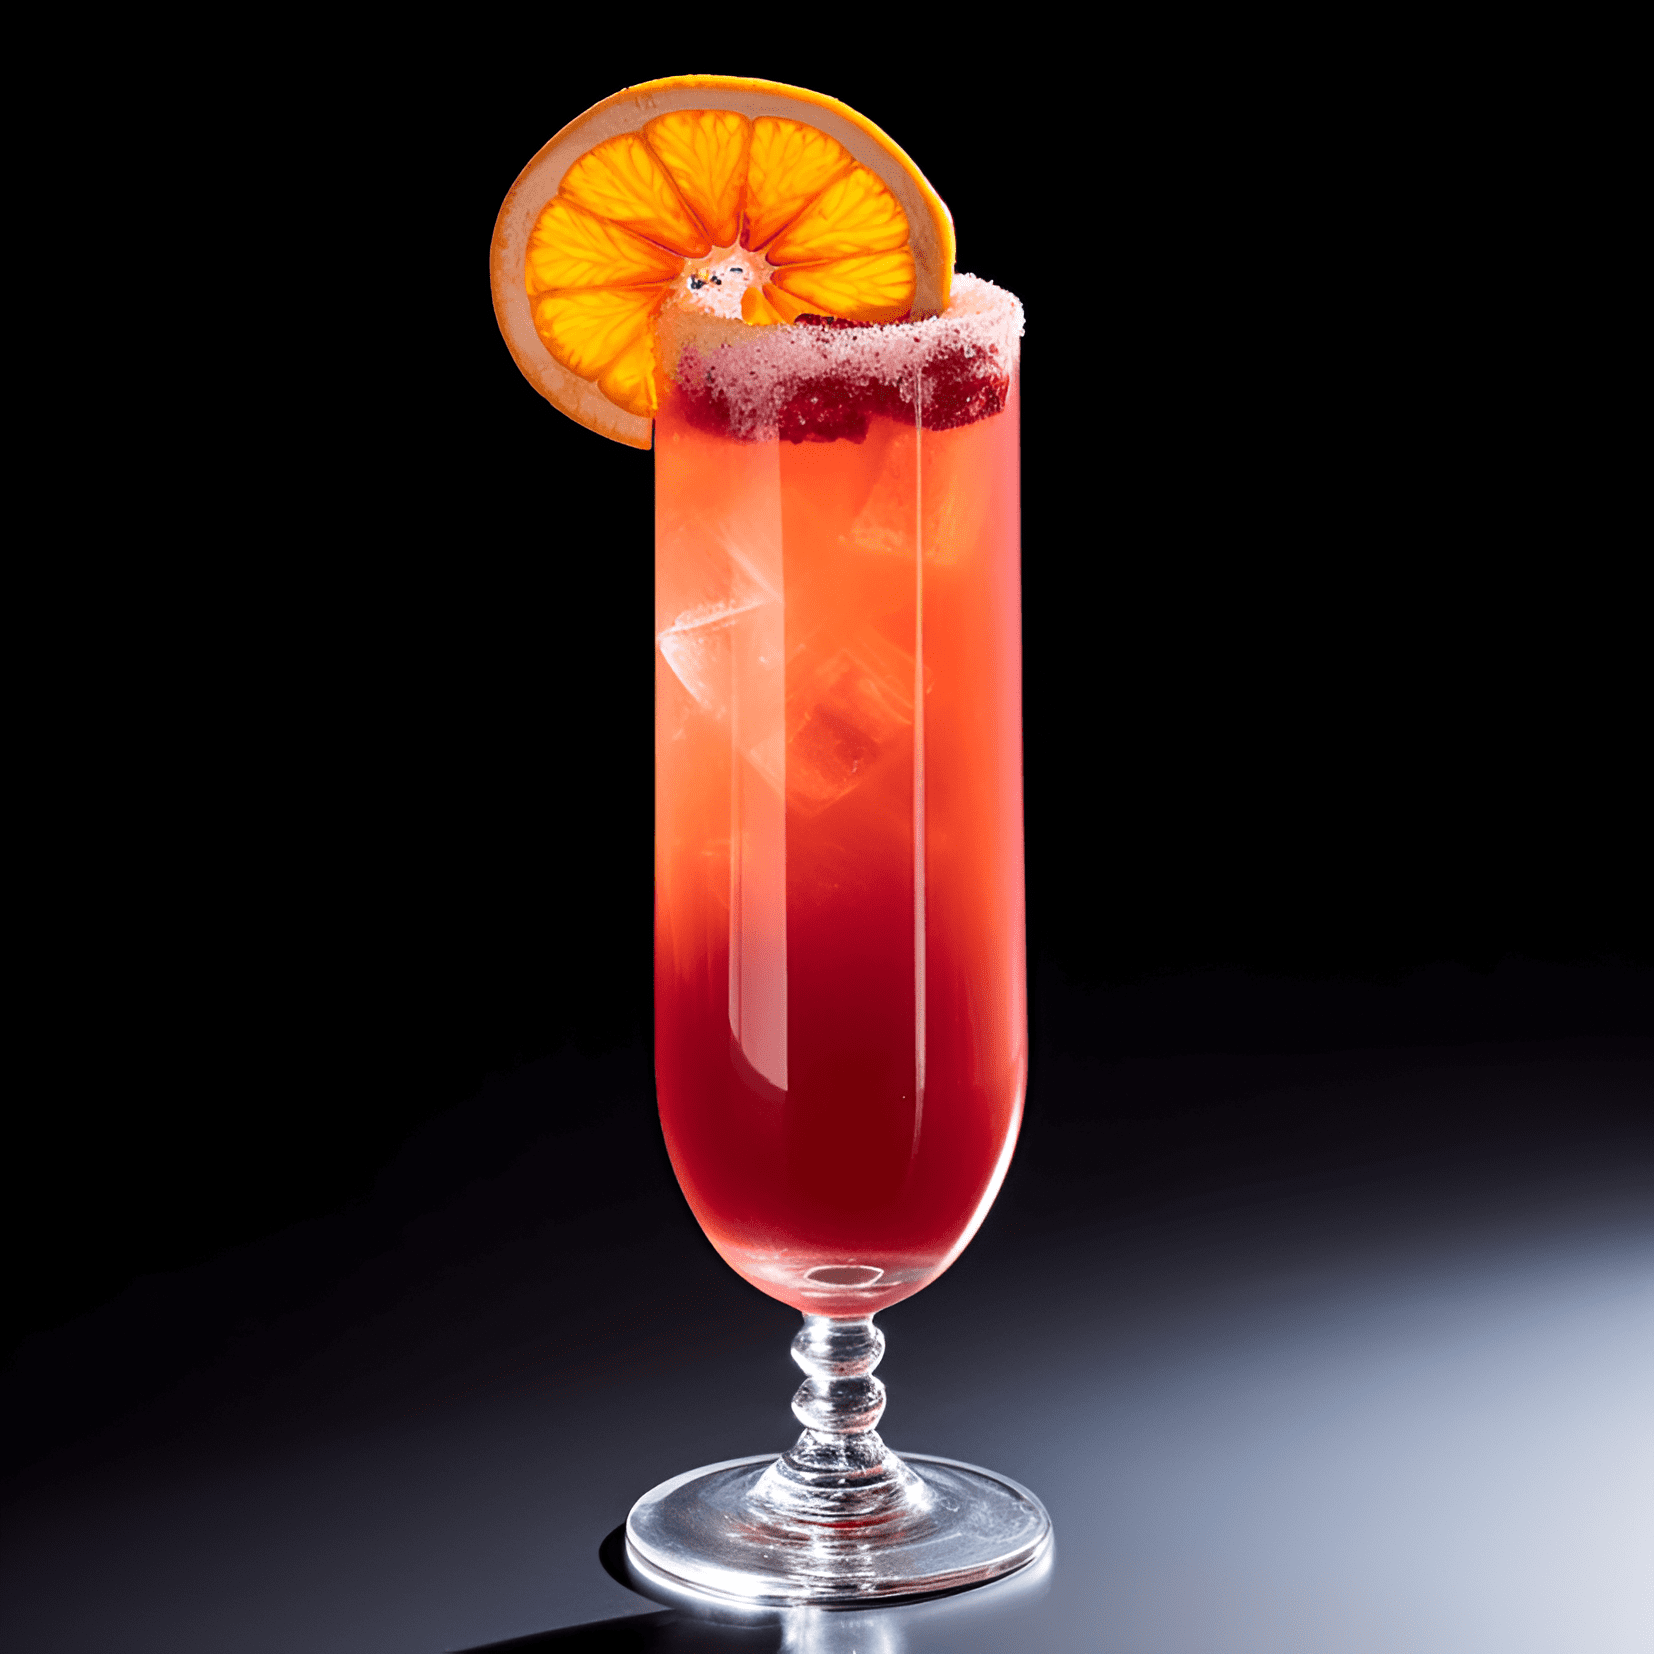 Good Morning Cocktail Recipe - The Good Morning cocktail has a bright, citrusy taste with a hint of sweetness. It is light and refreshing, making it perfect for a morning pick-me-up. The combination of orange juice, lemon juice, and grenadine creates a balanced flavor profile that is both tangy and sweet.